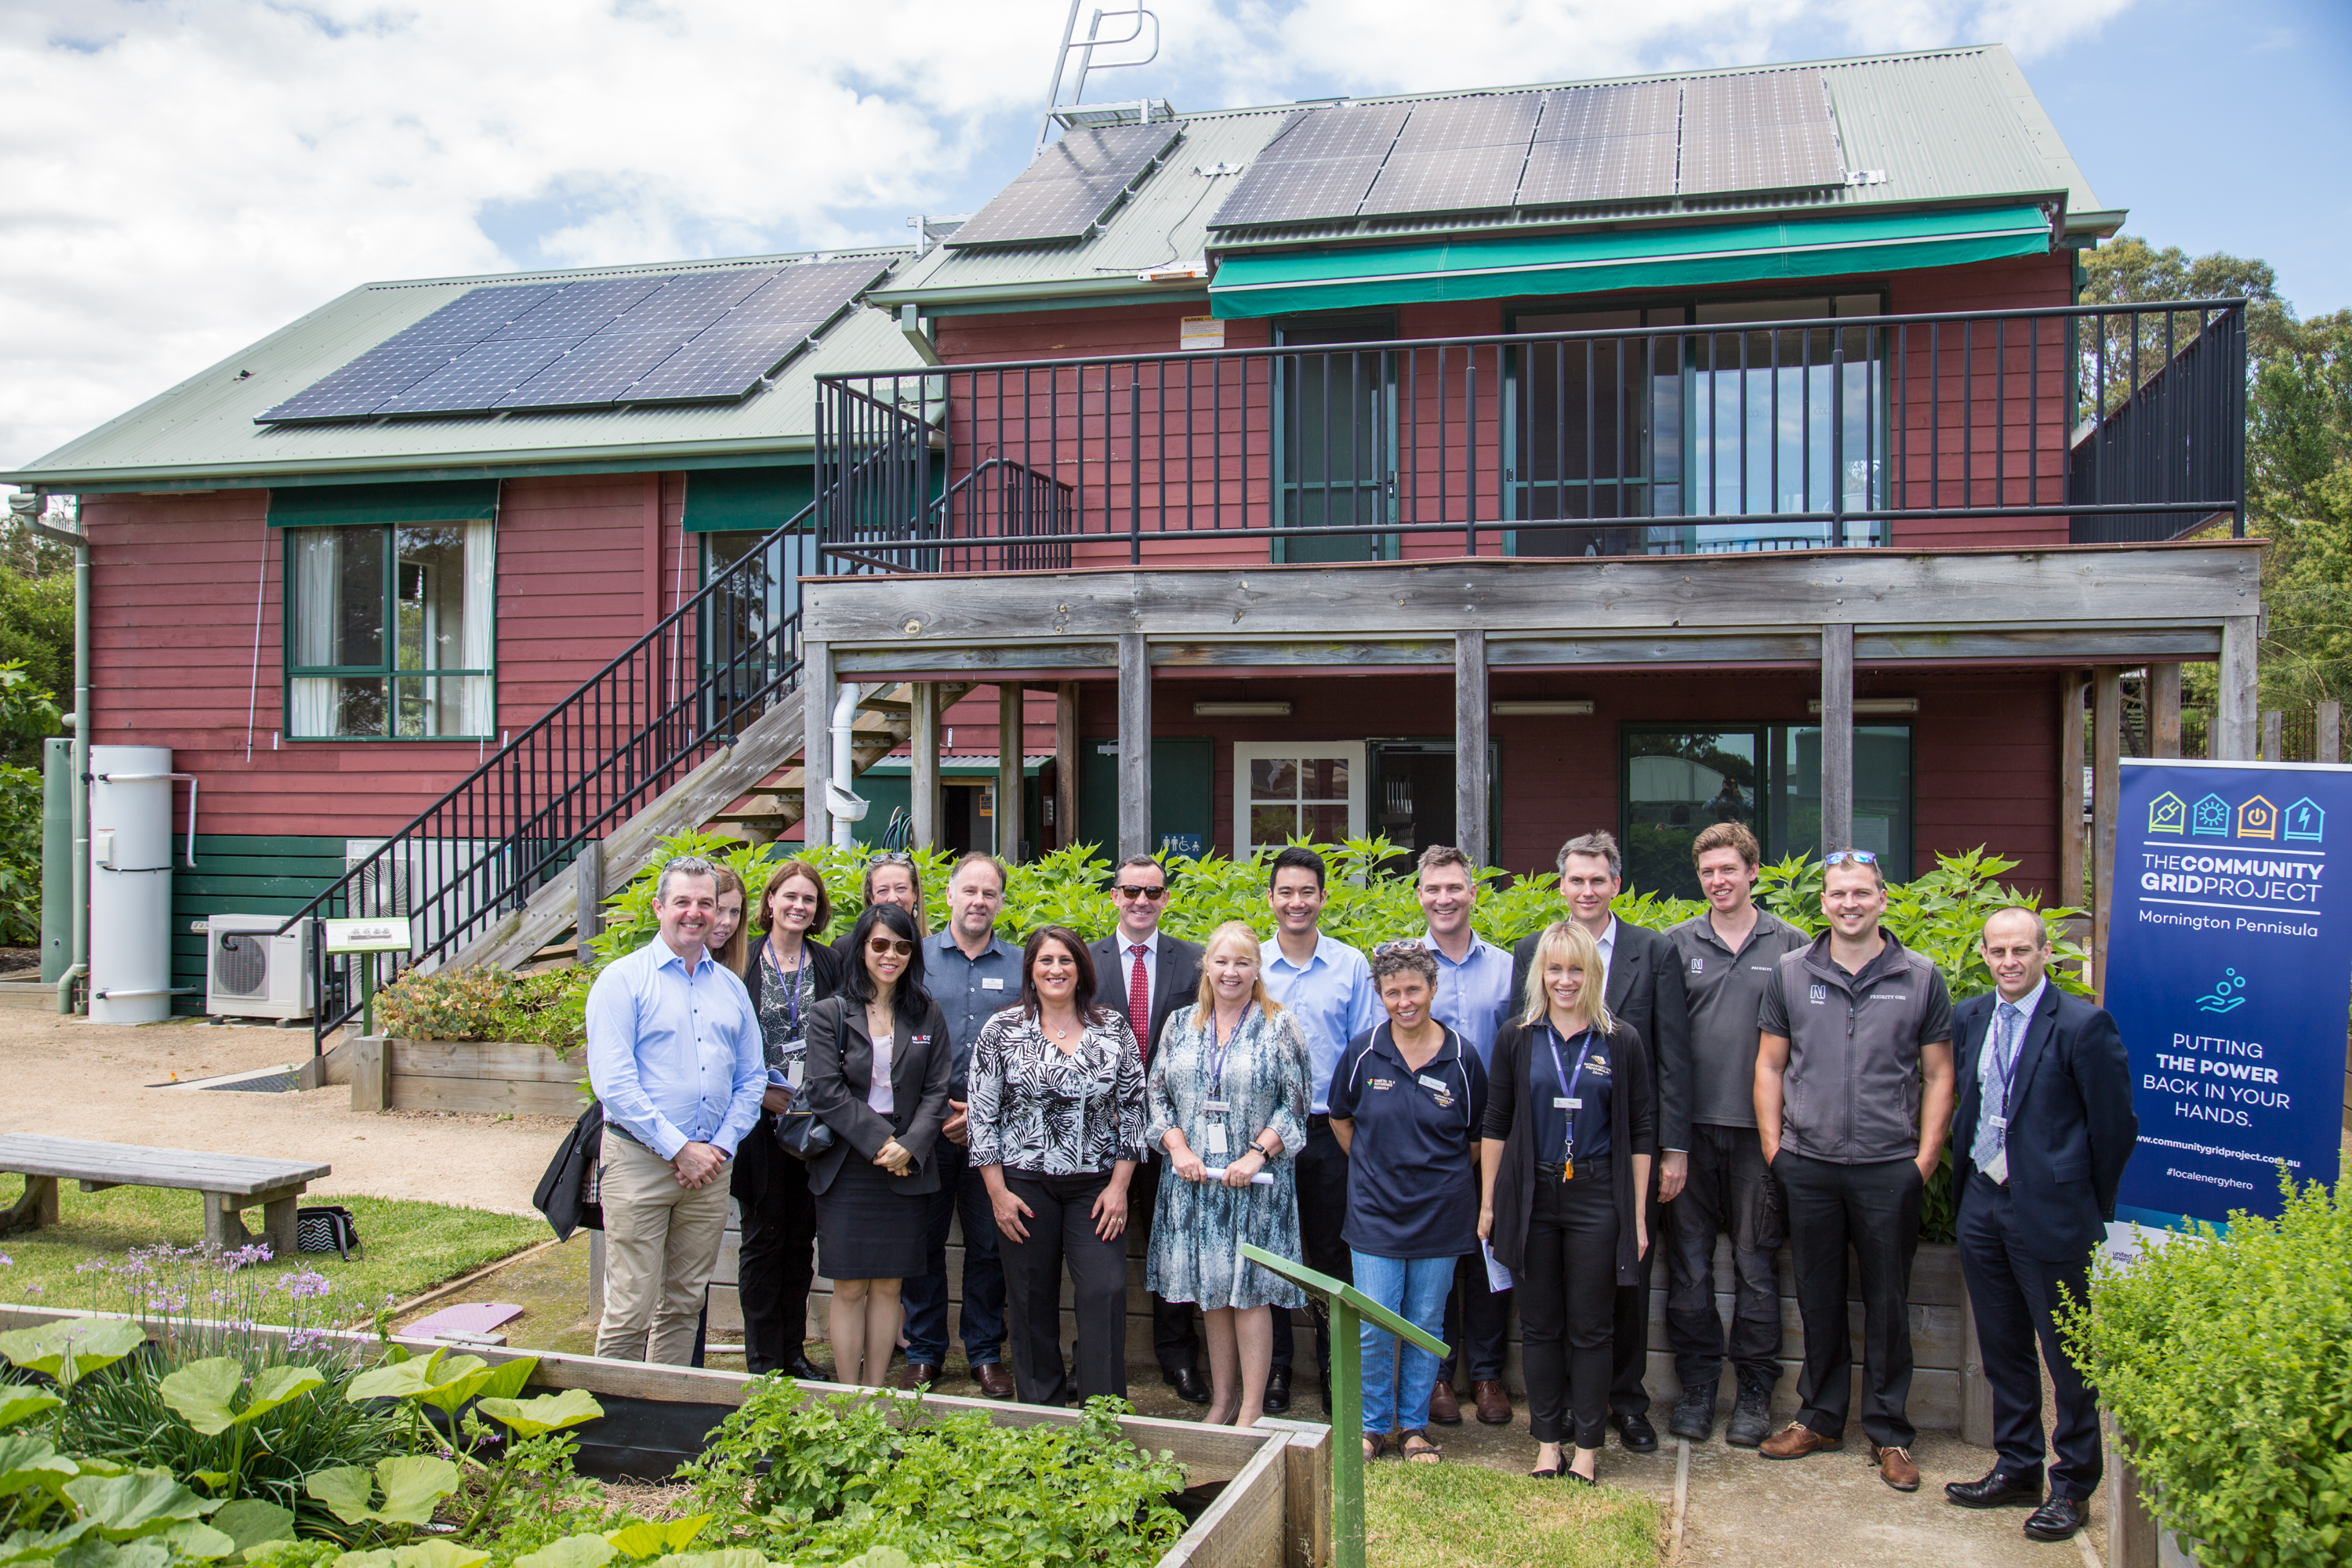 THE BRIARS ECO HOUSE LAUNCH